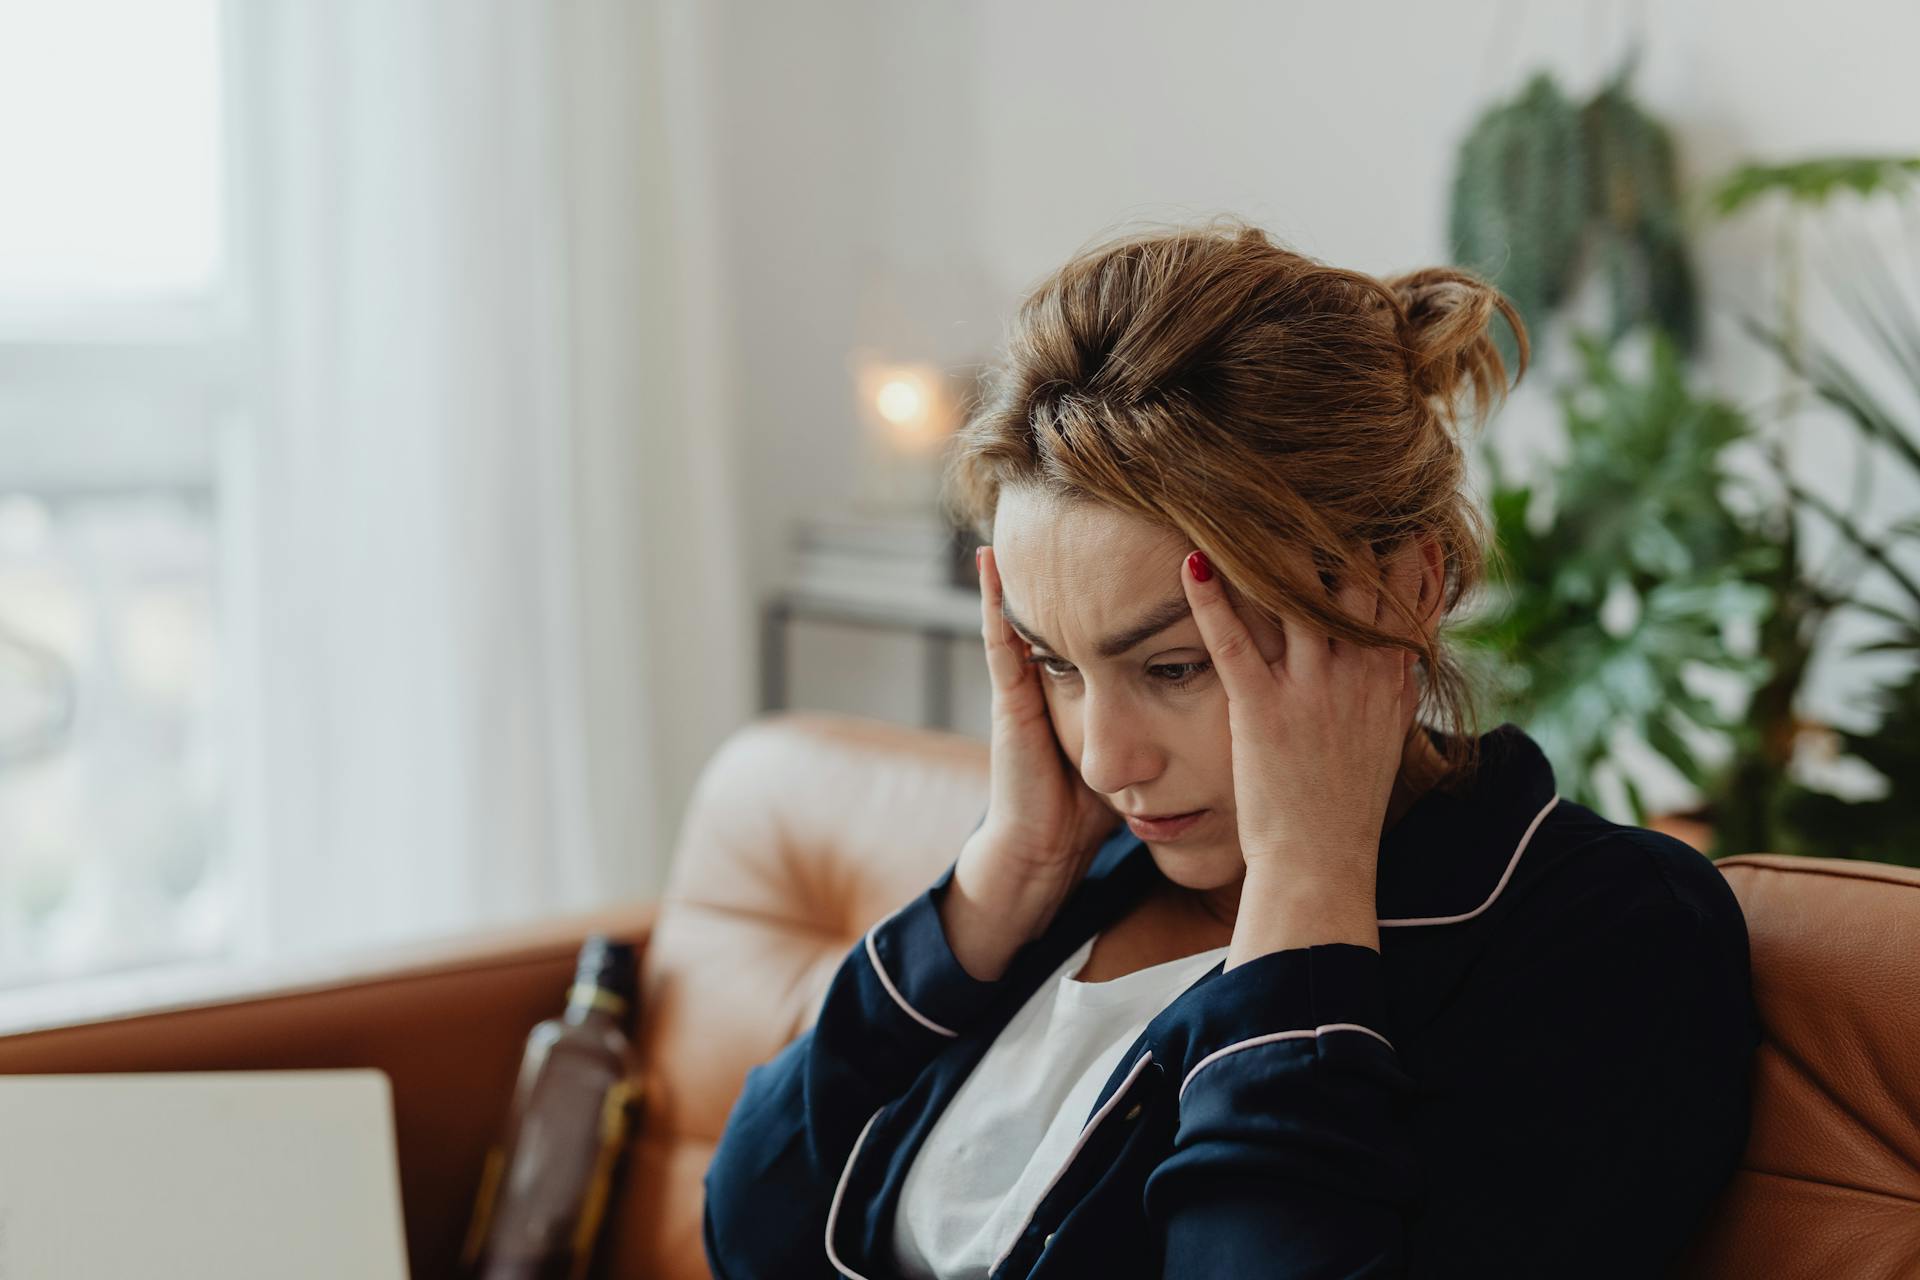 A frustrated woman | Source: Pexels